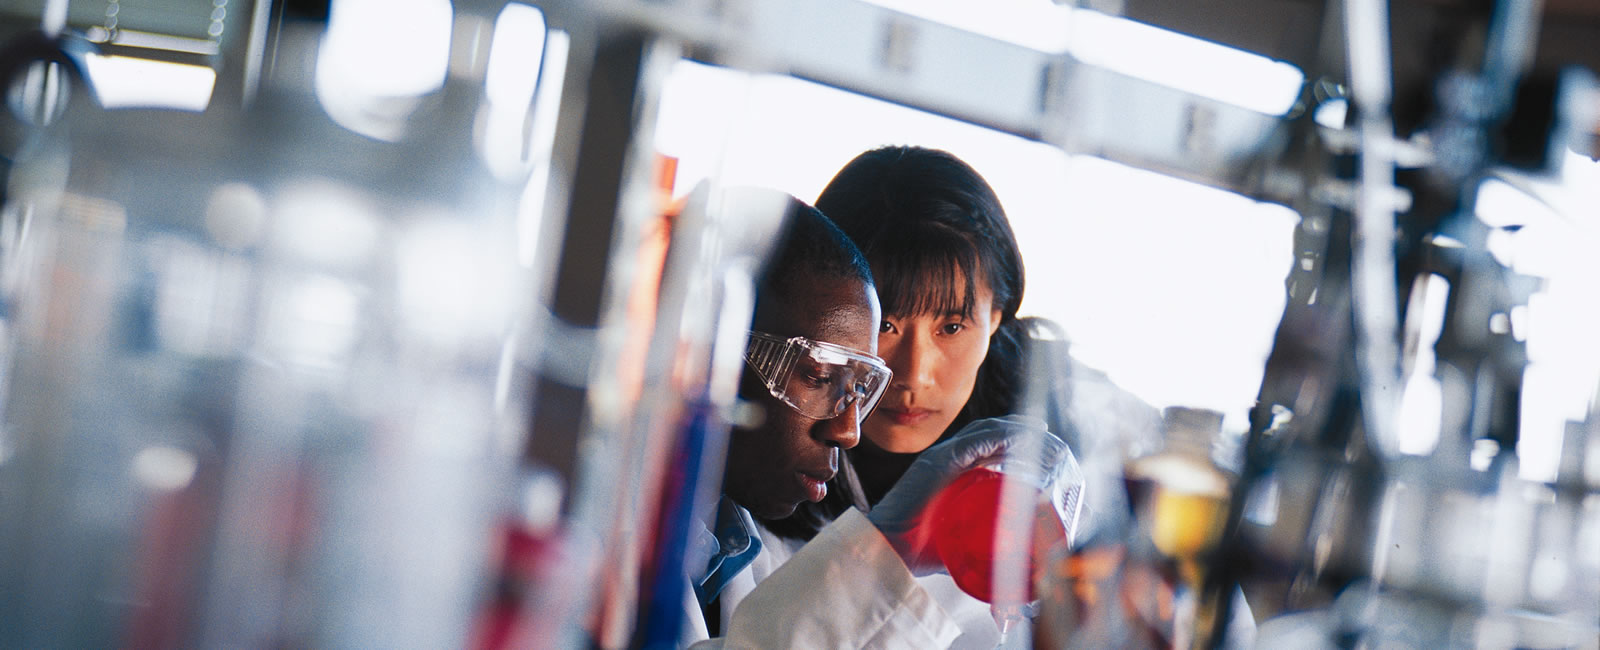 In the lab where a student and faculty member collaborate and examine red chemicals in flasks